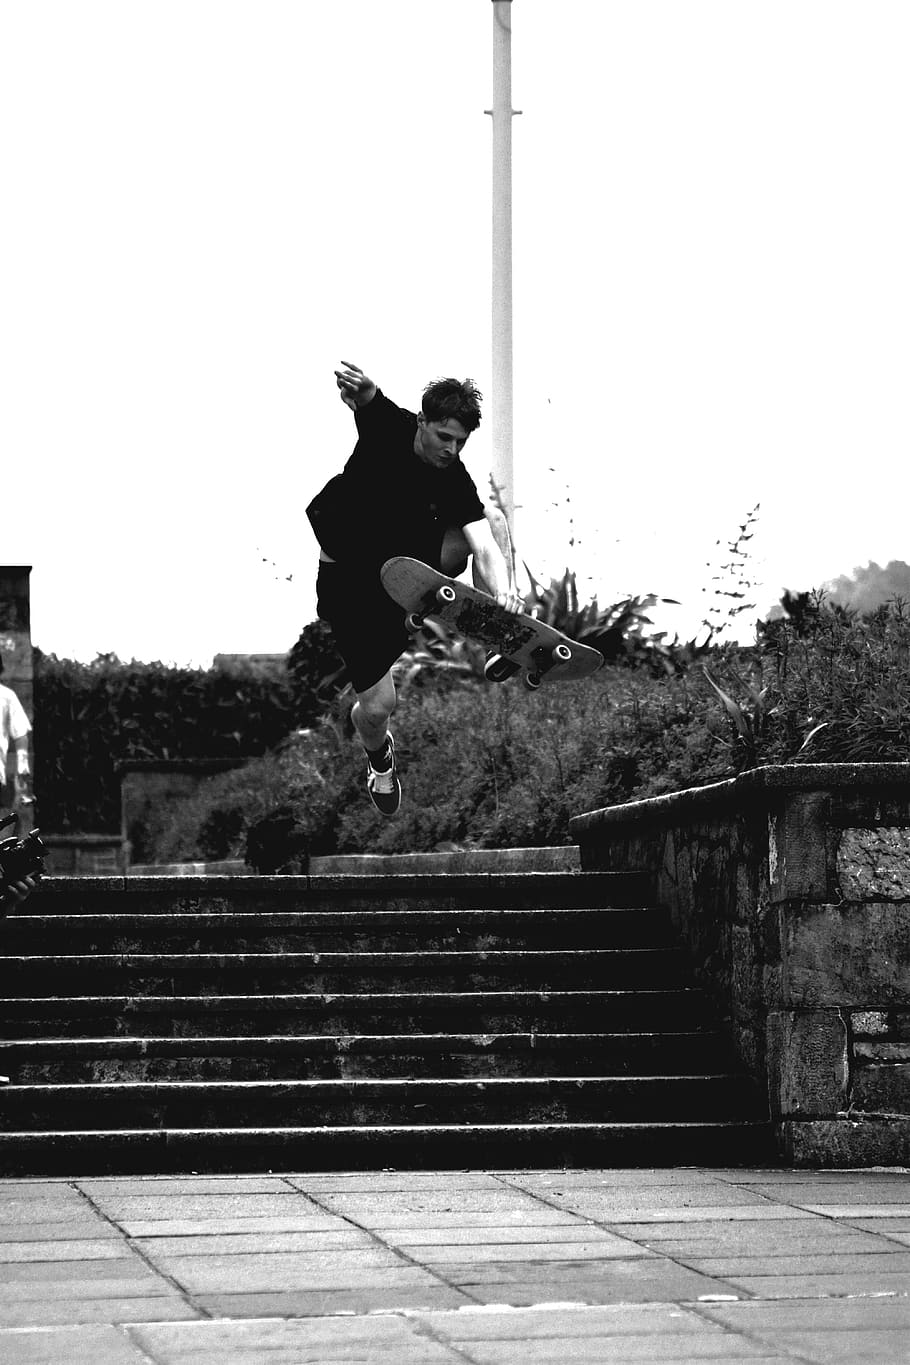 Grayscale Photo of Man Doing Trick on Skateboard on Park, action